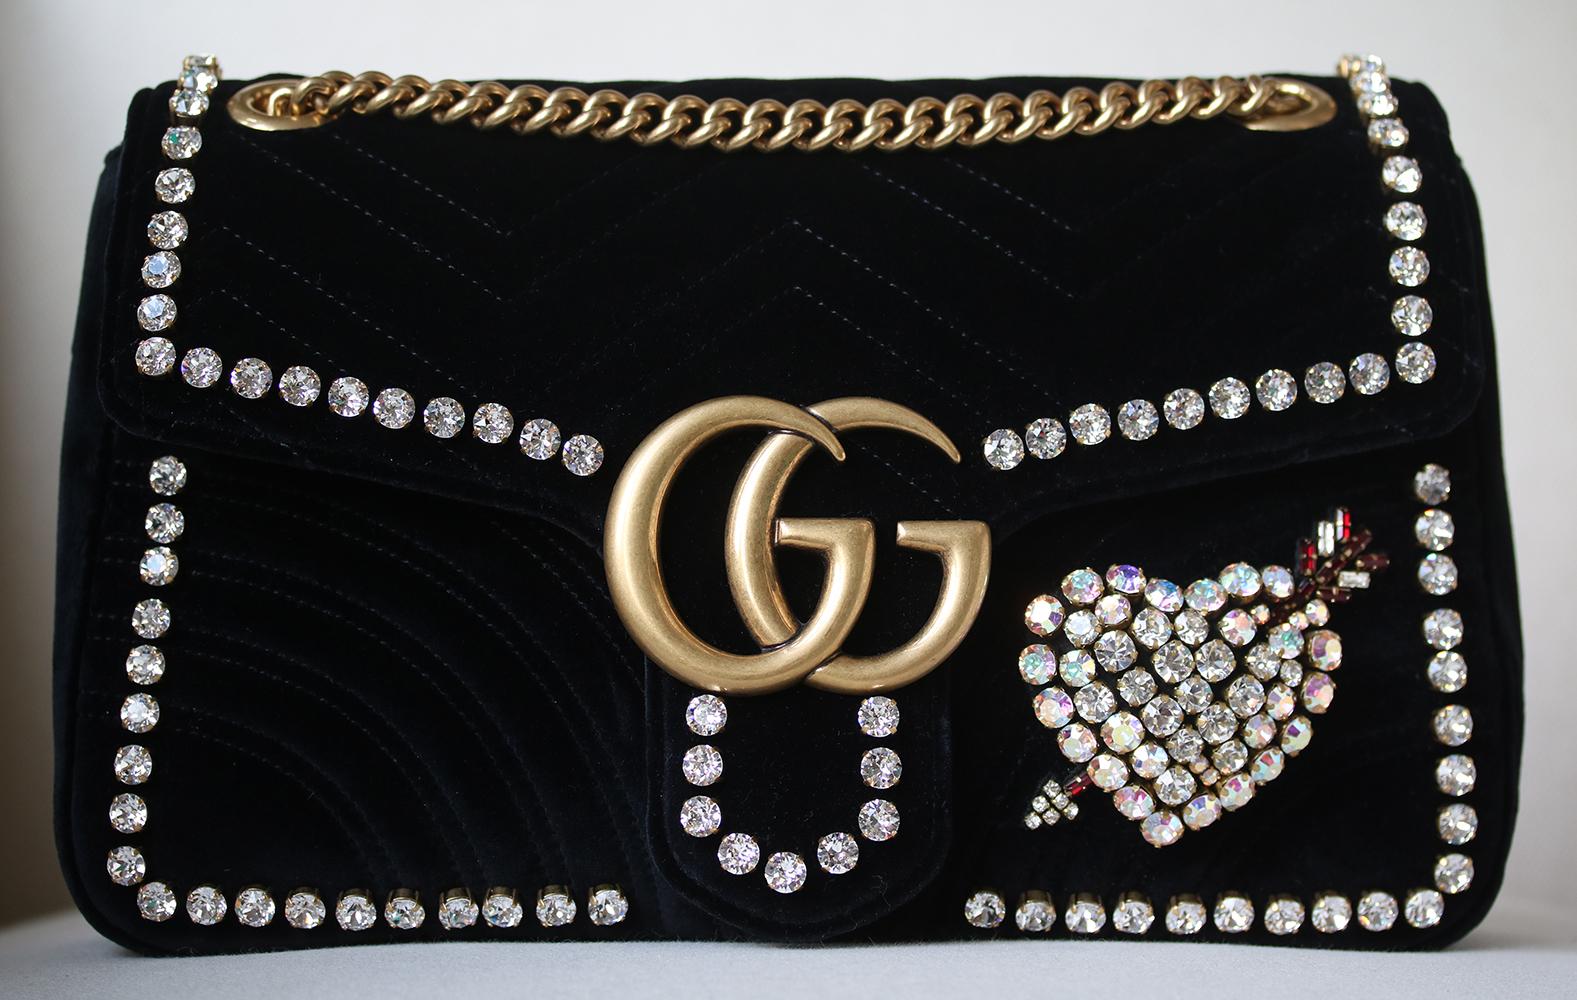 The GG Marmont Chain Shoulder Bag Exclusive to Saks Fifth Avenue Has A Softly Structured Shape And An Oversized Flap Closure With Double G Hardware. The Crystal heart adorns the bag. Crystal edging. The Sliding Chain Strap Can Be Worn Multiple Ways,